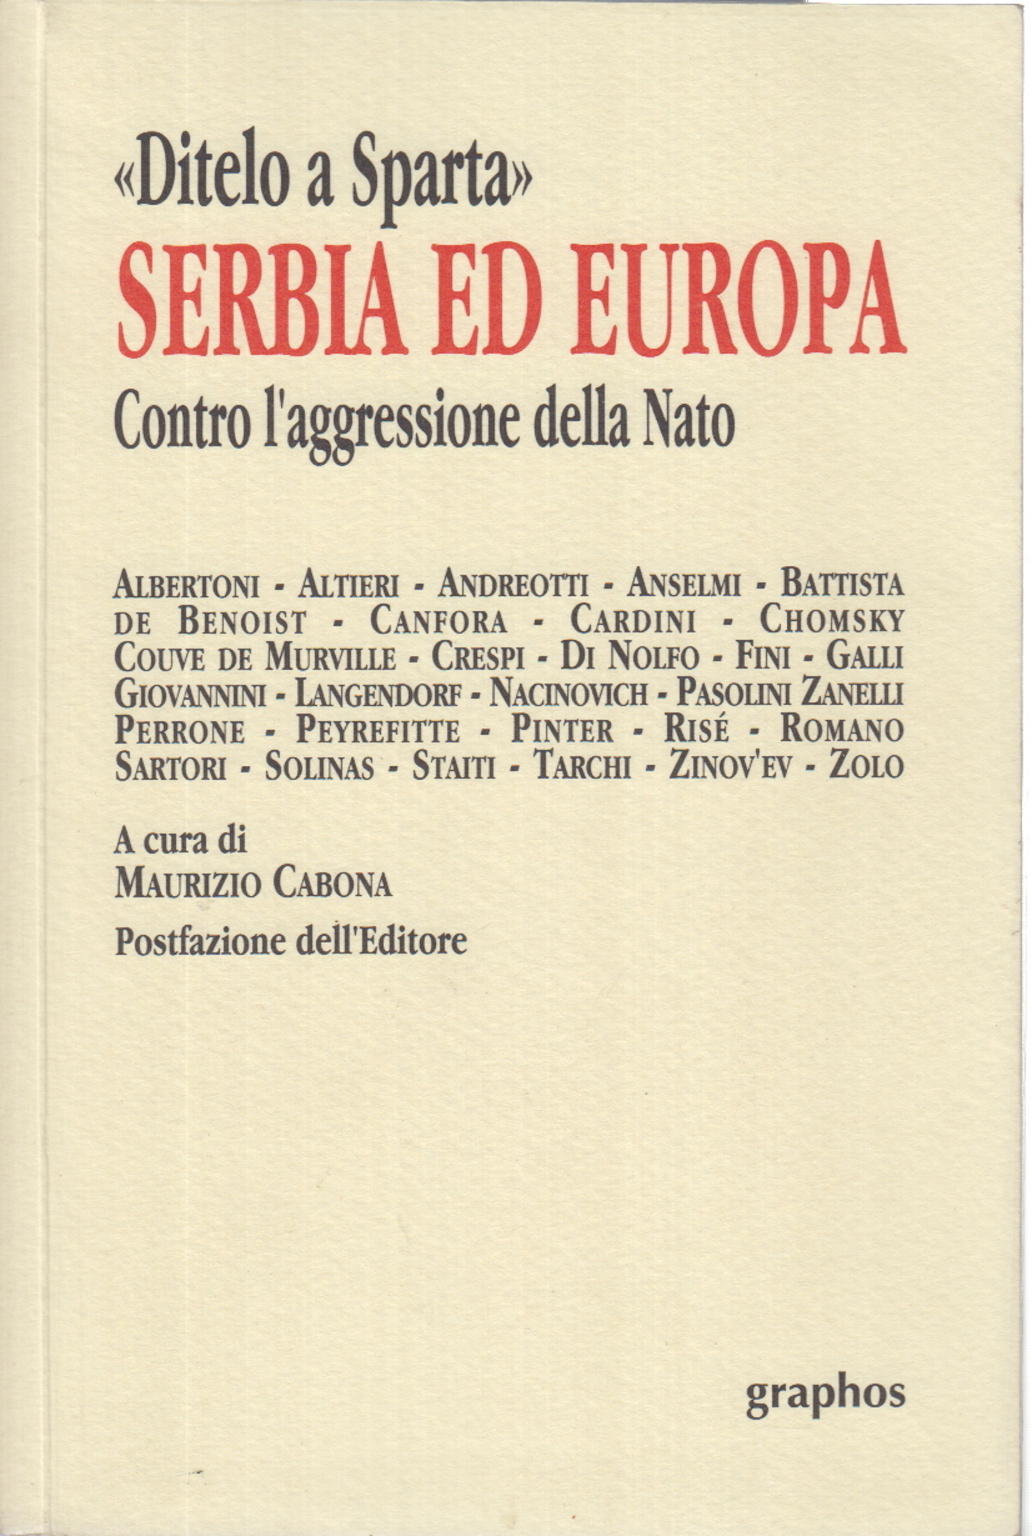 Tell them in Sparta". Serbia and Europe: against the aggr, Maurizio Cabona